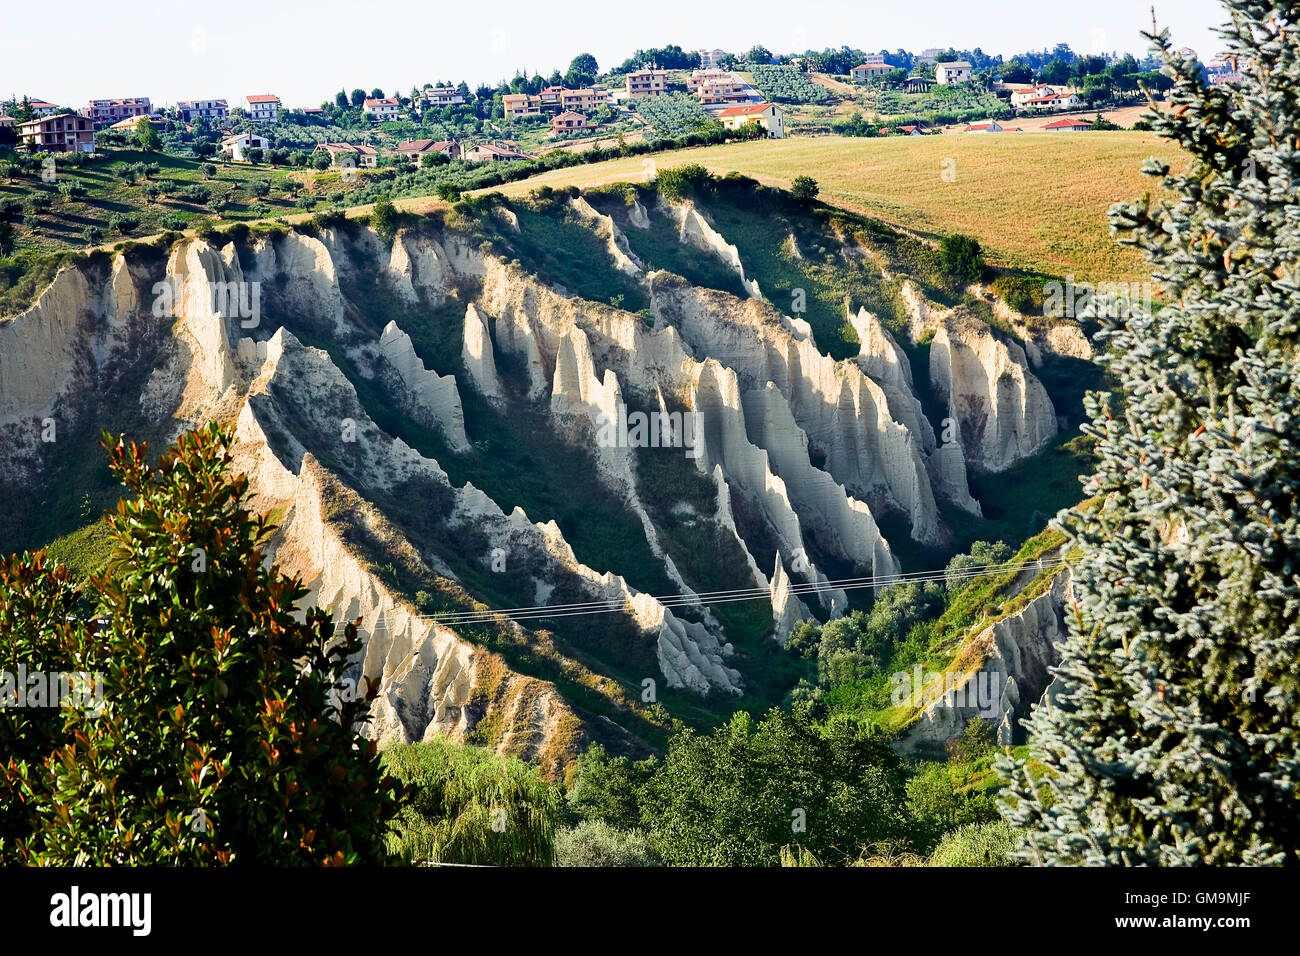 Badlands in Chieti province (Italy) Stock Photo